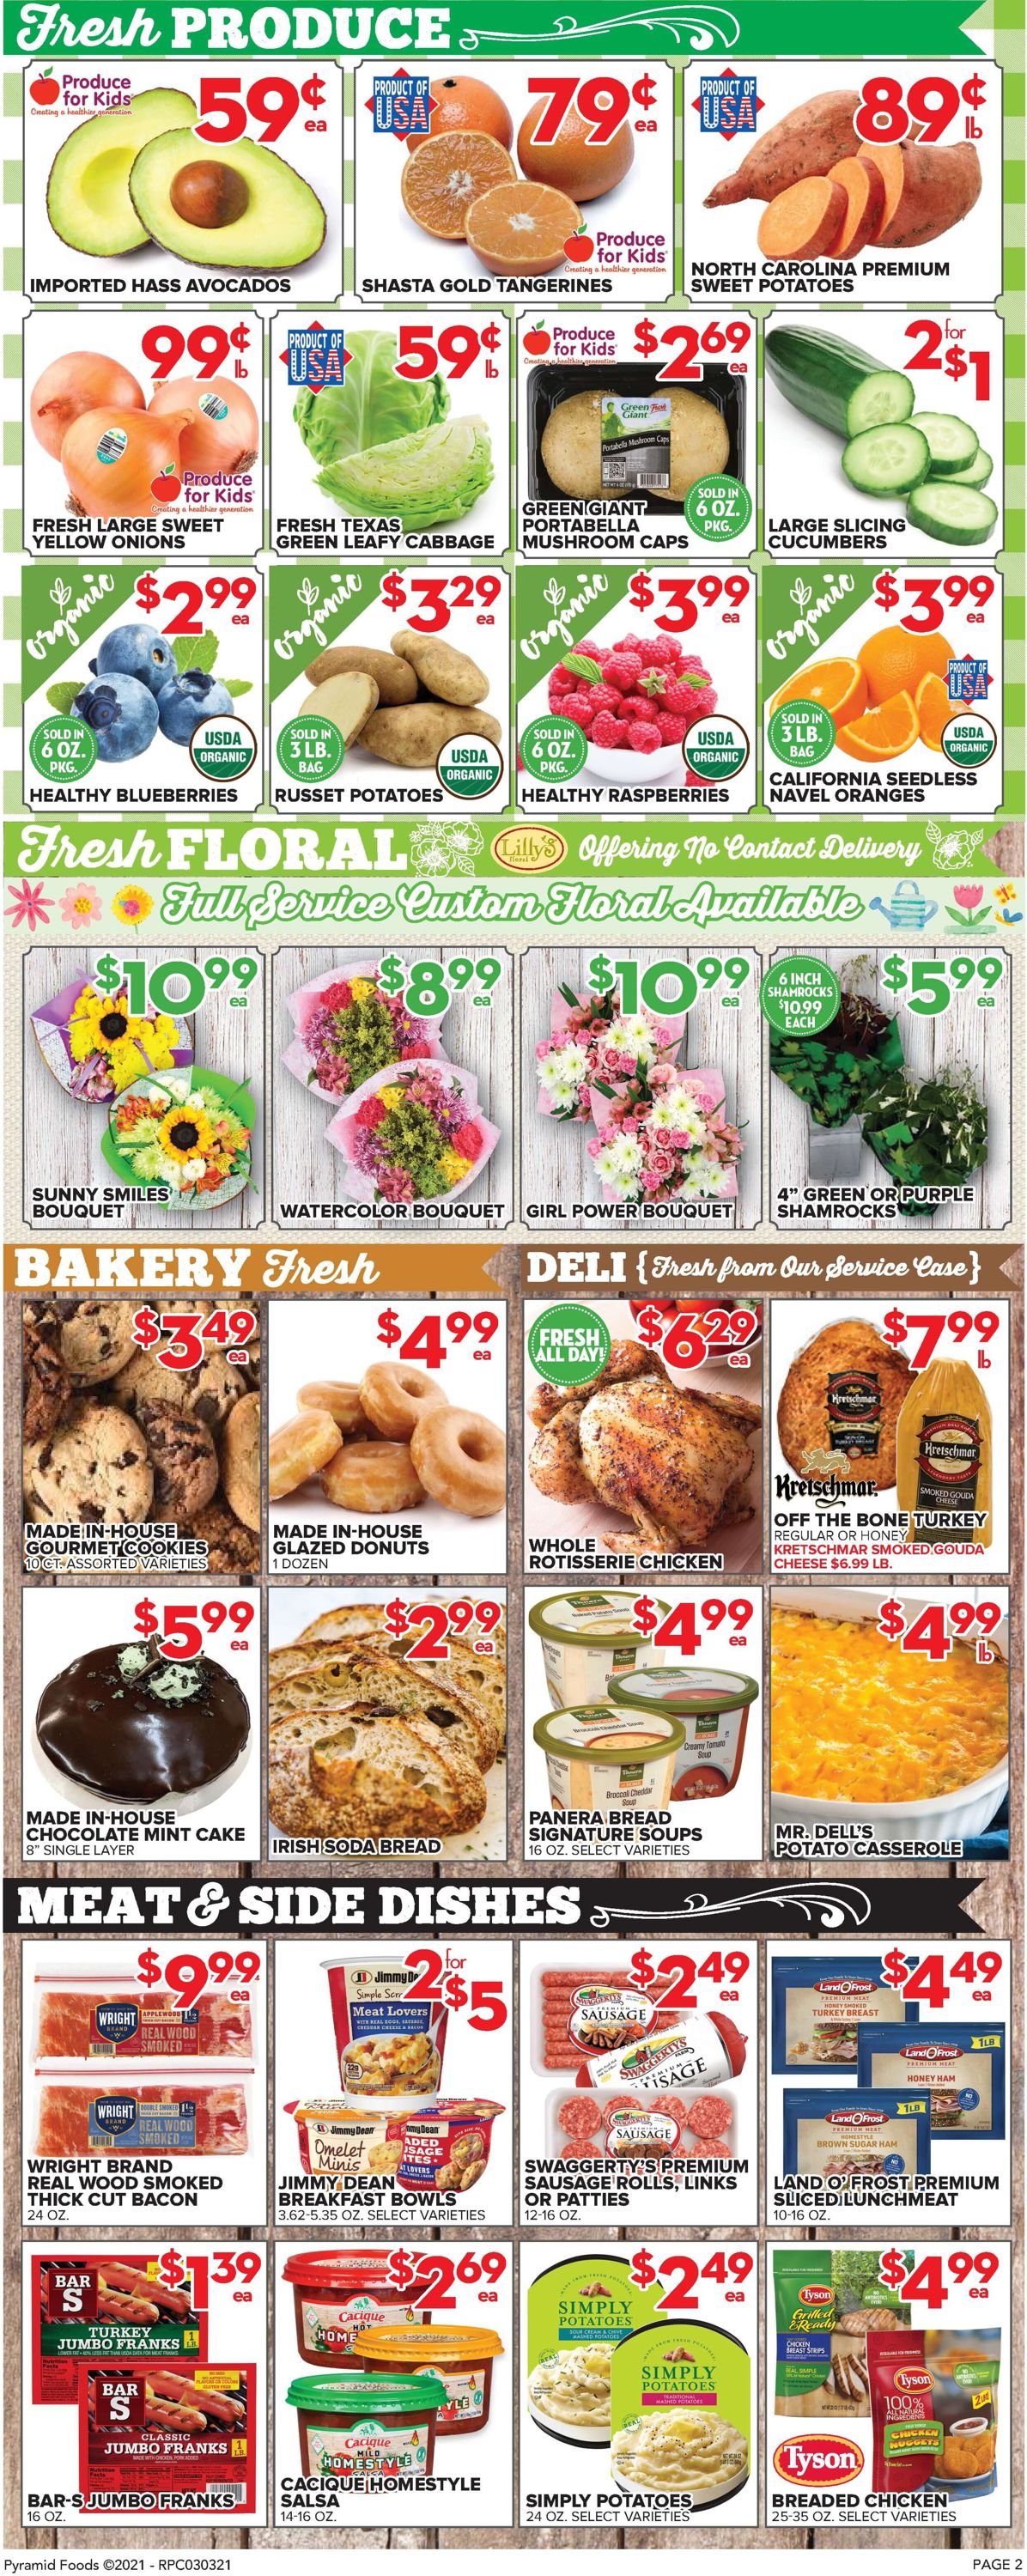 Price Cutter Weekly Ad Circular - valid 03/03-03/09/2021 (Page 2)